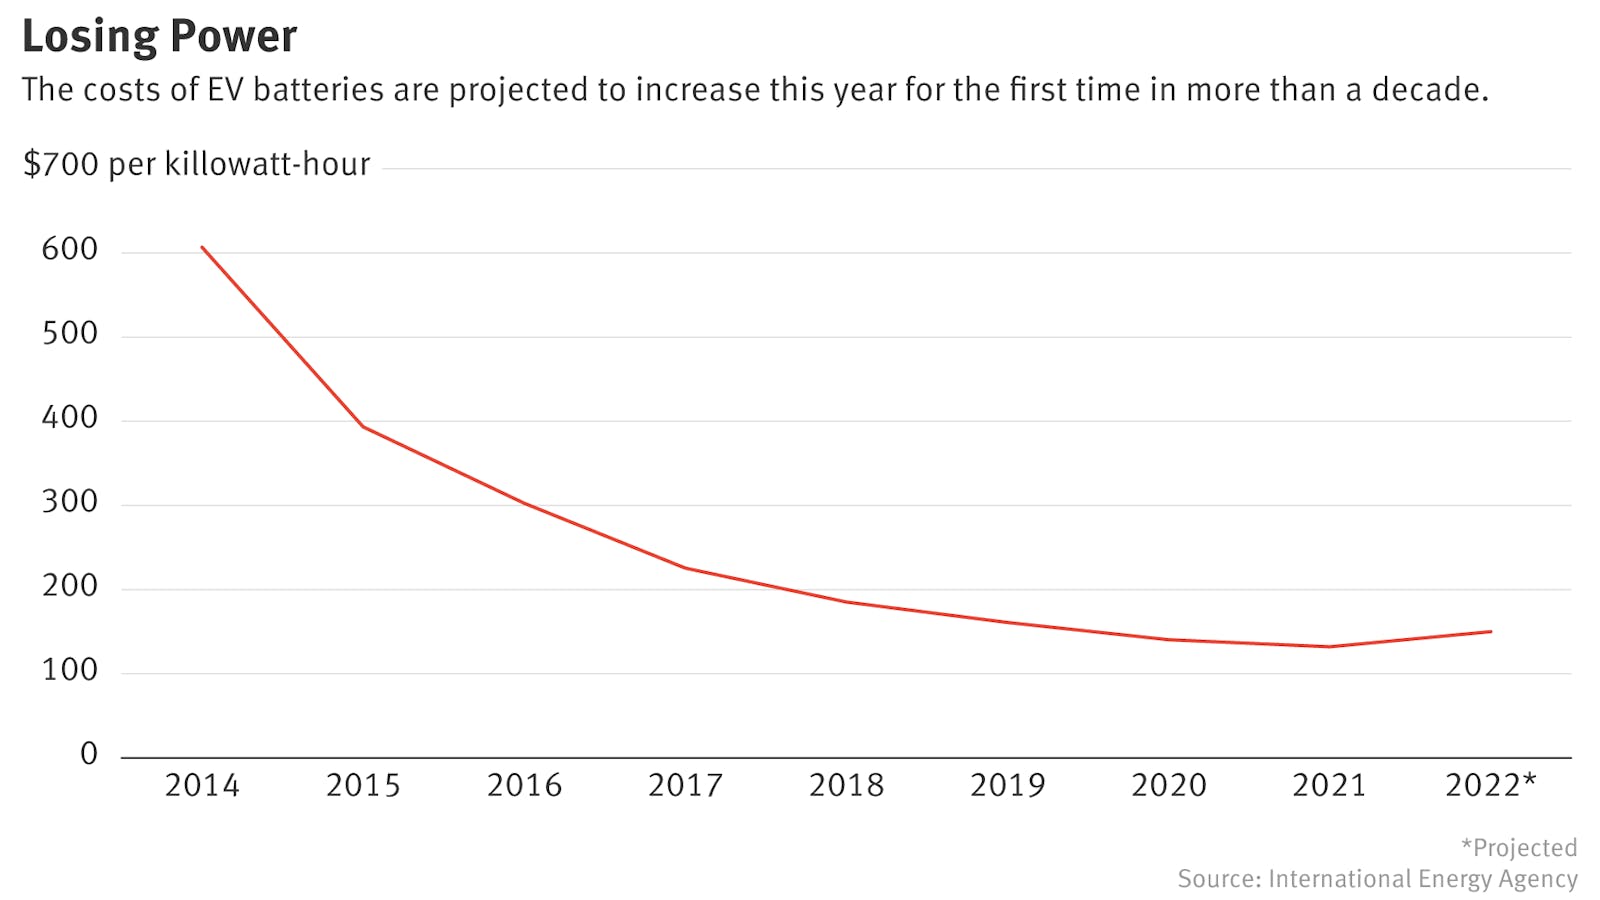 After a Decade of Declines, EV Battery Costs Are To Rise 14% This Year